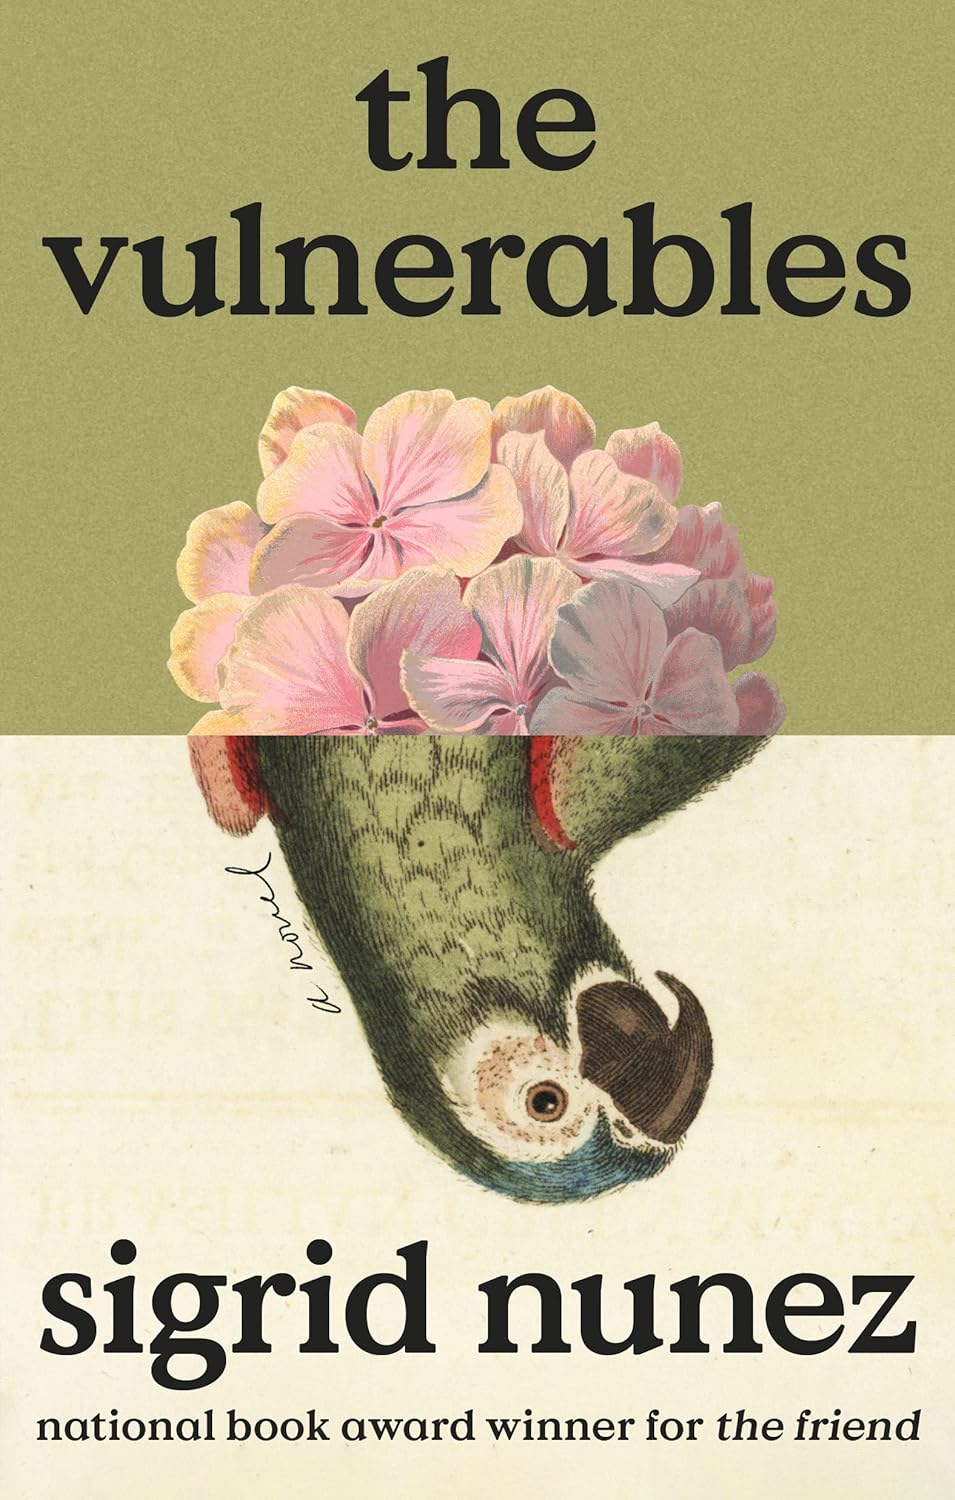 The cover of The Vulnerables